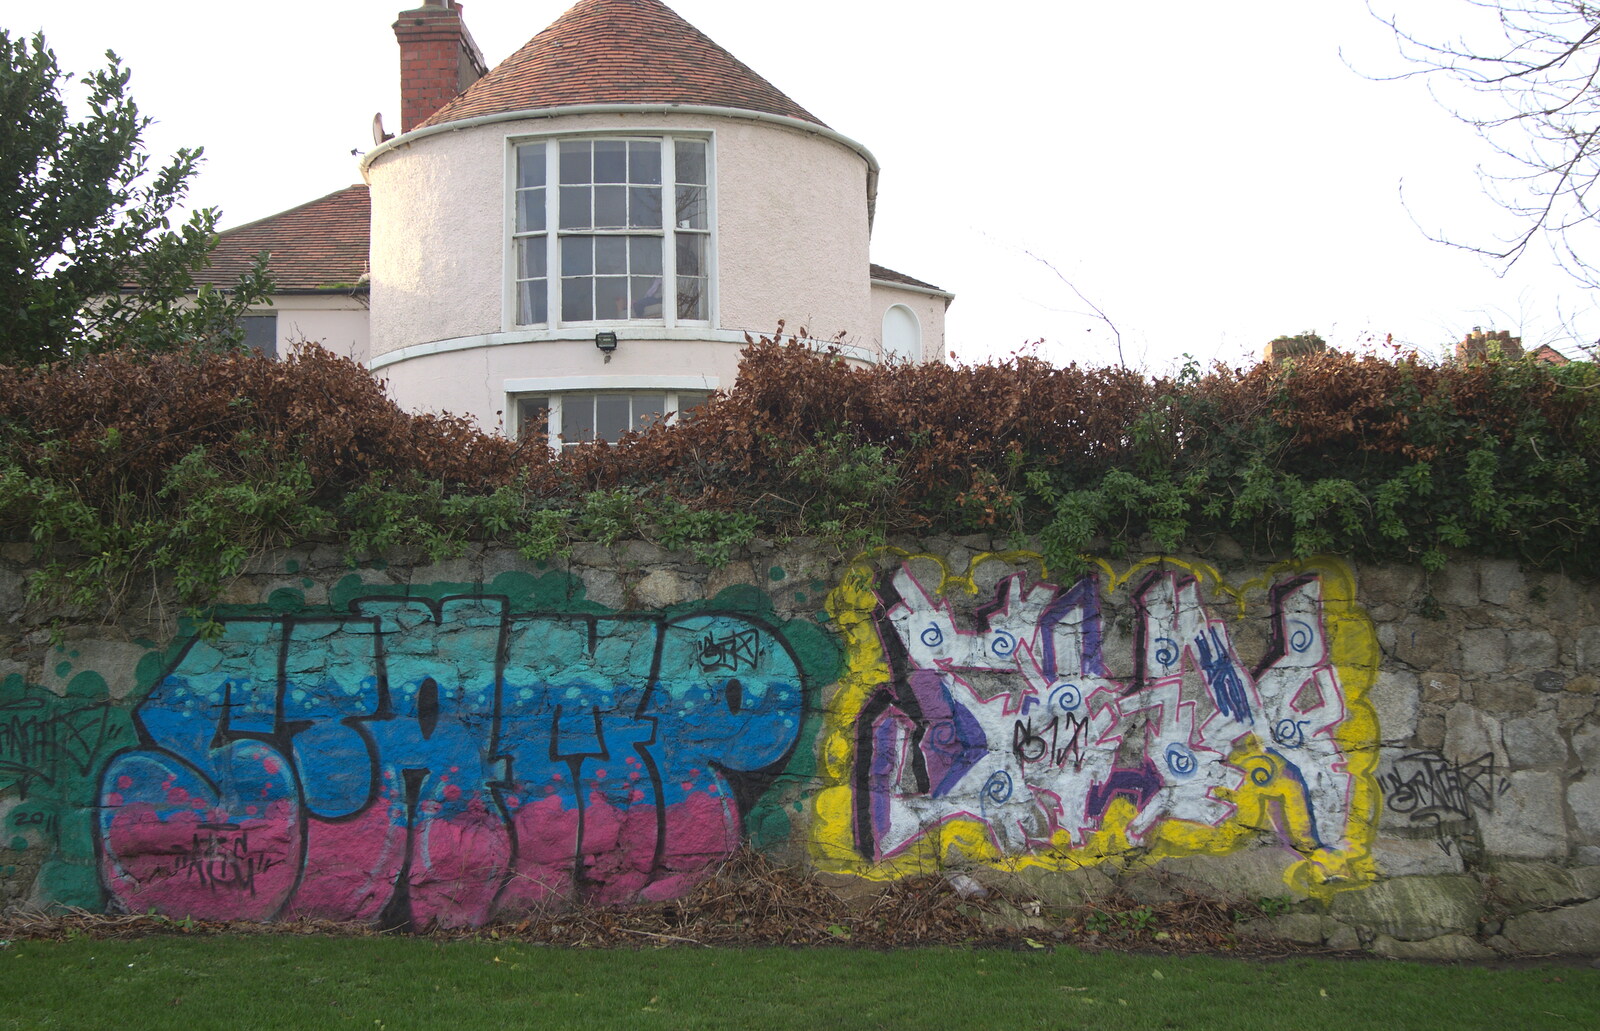 Colourful graffiti at the end of Seafort Parade from A Morning in Blackrock, County Dublin, Ireland - 8th January 2012